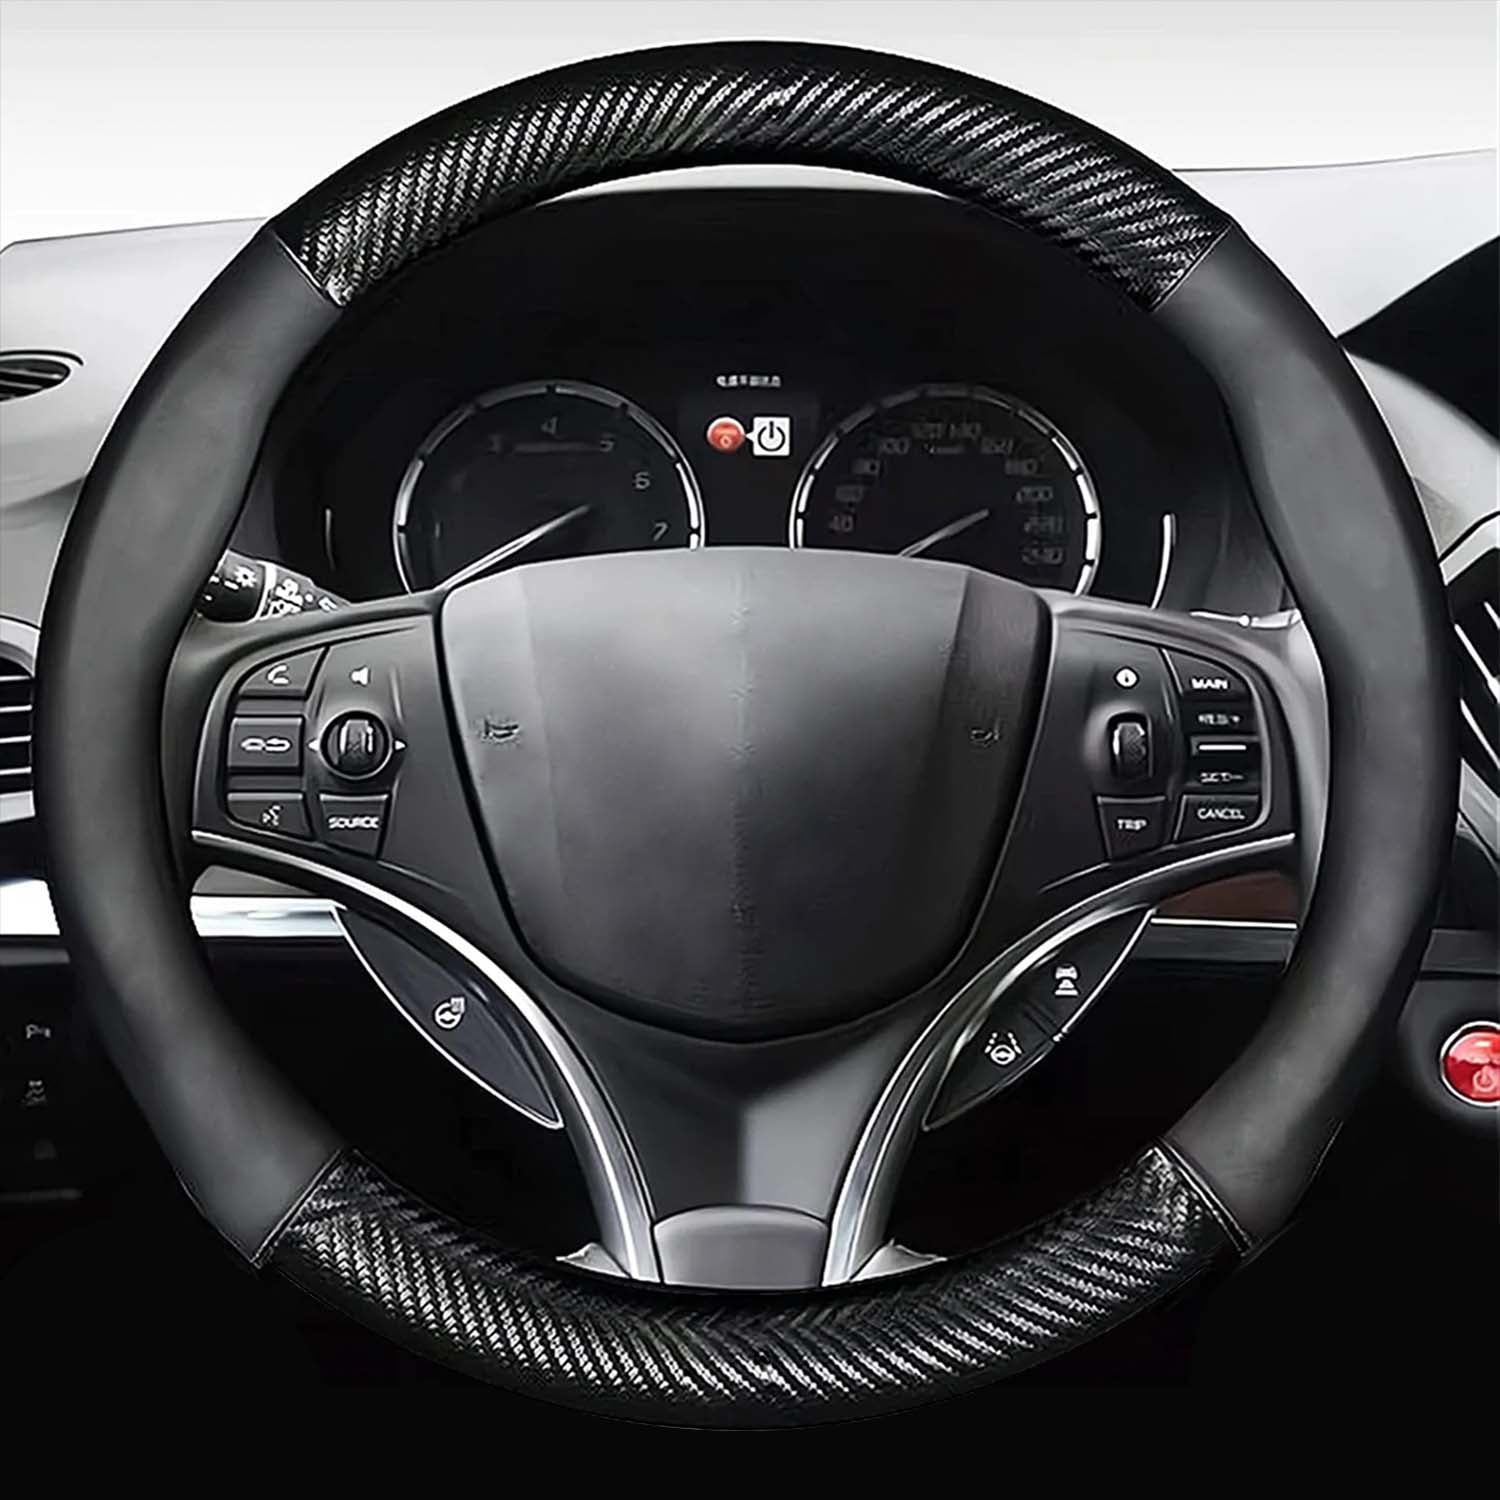 Enhance Your Ride with a Stylish Acura Steering Wheel Cover